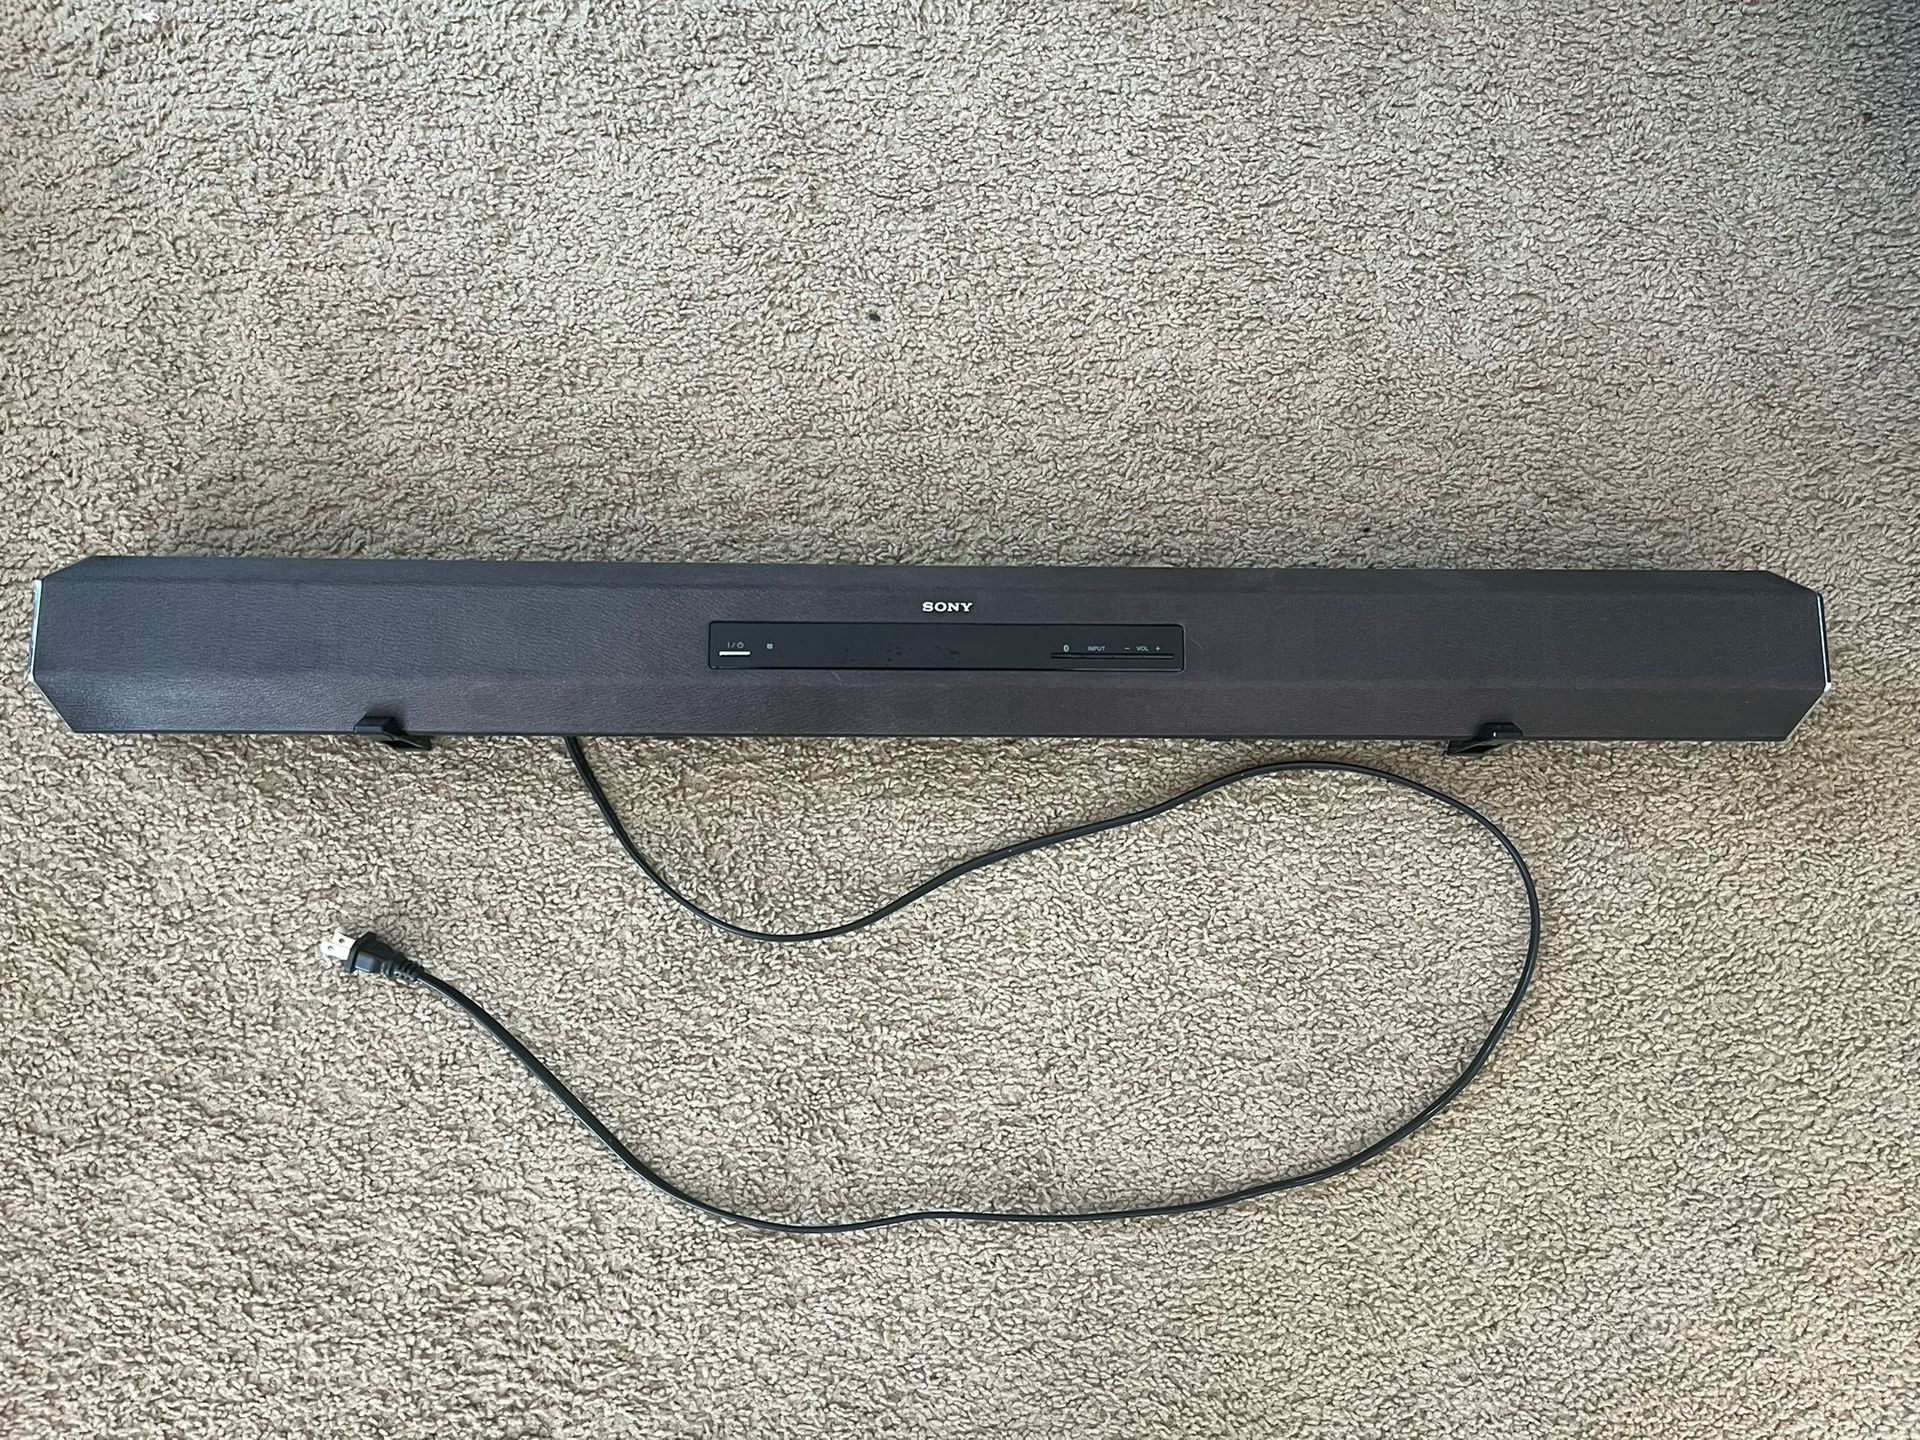 BUNDLE Sony Active HomeSound bar with Subwoofer